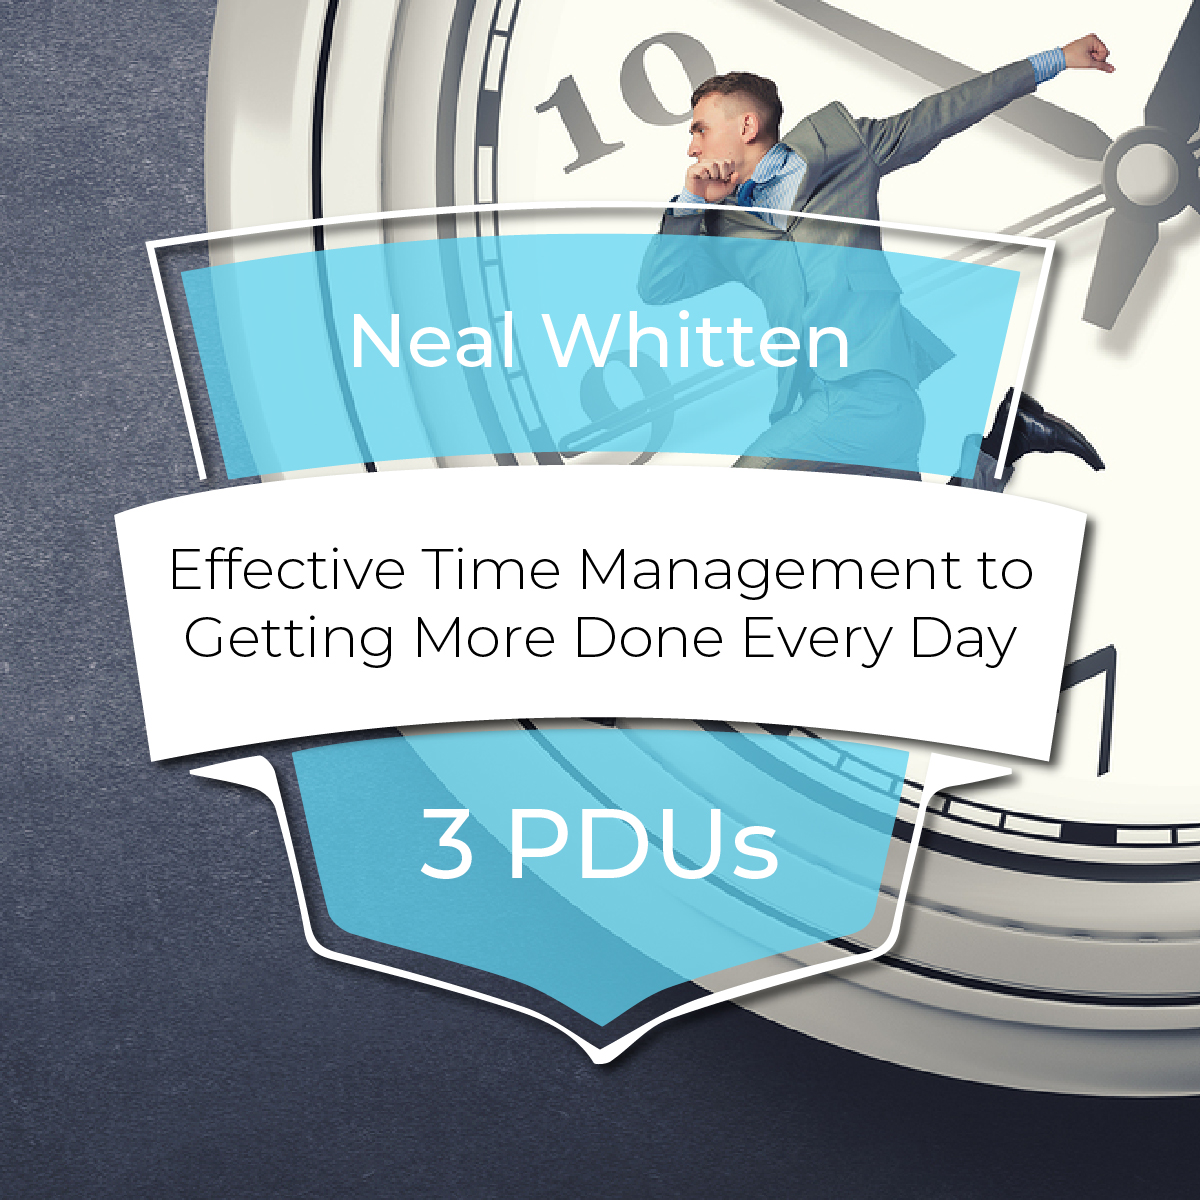 Effective Time Management to Getting More Done Every Day